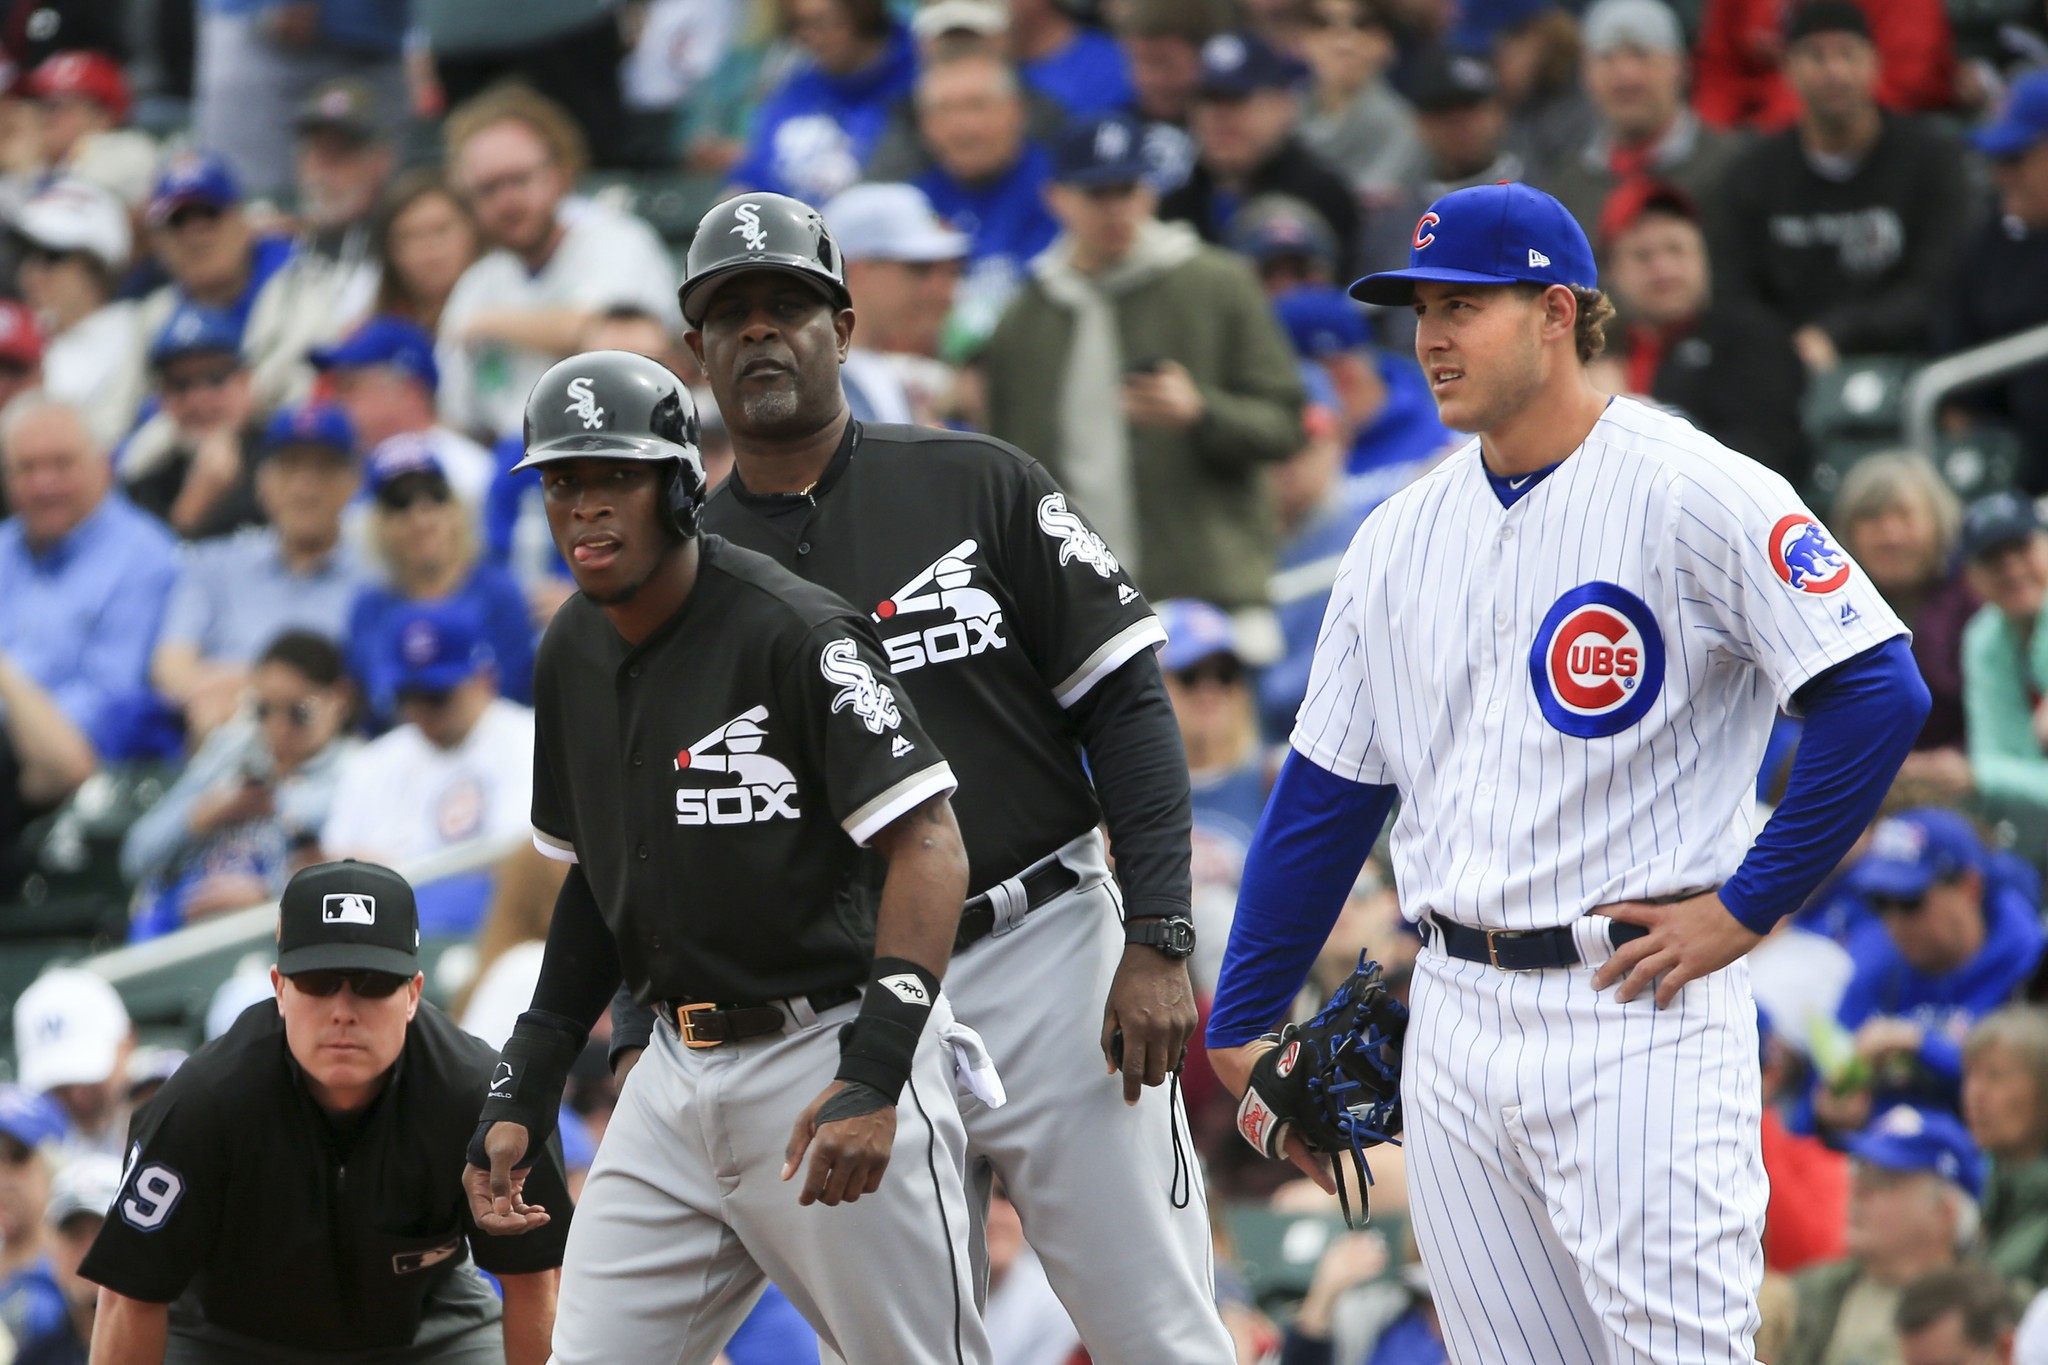 Facebook, CSN will live stream CubsWhite Sox games